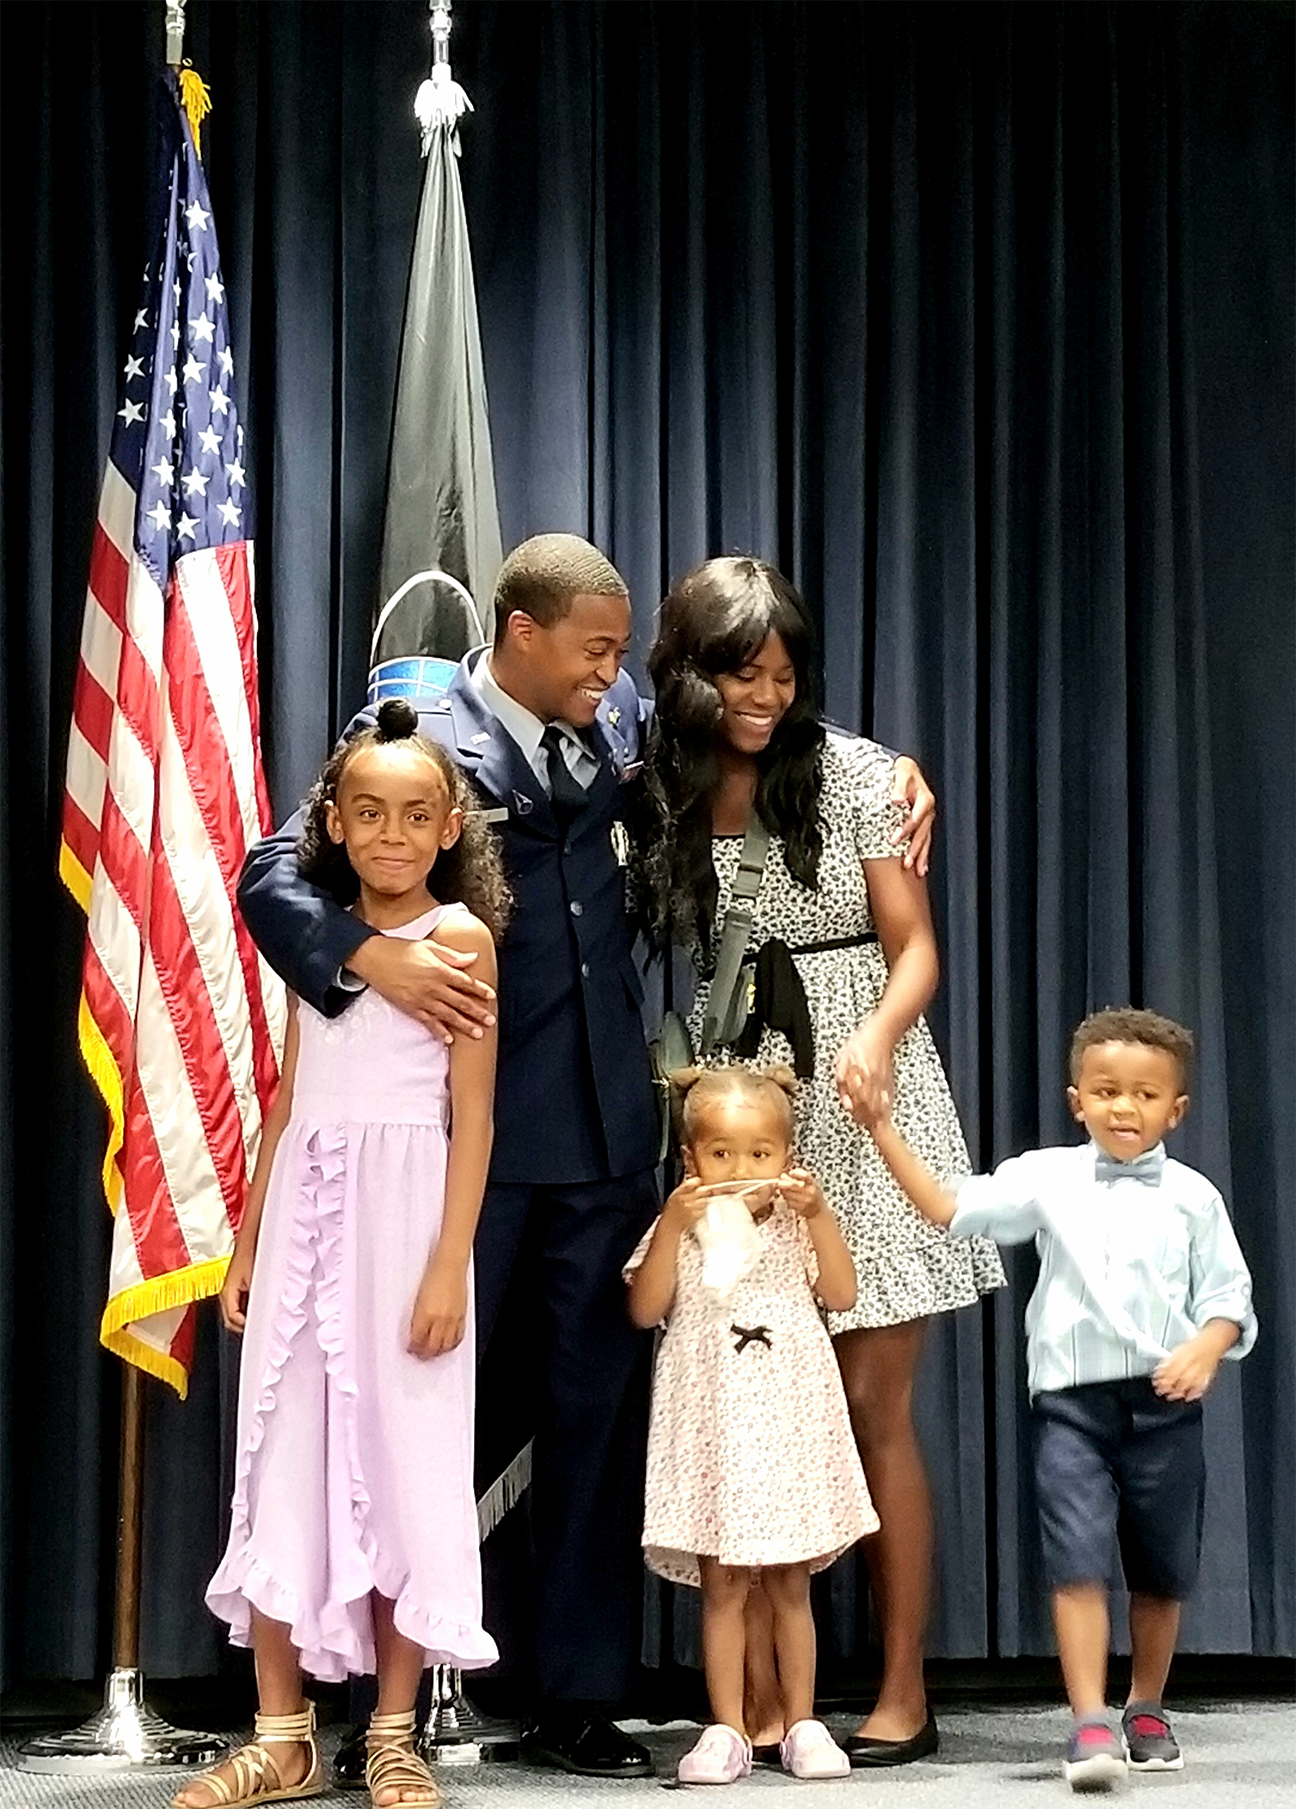 image of officer and family